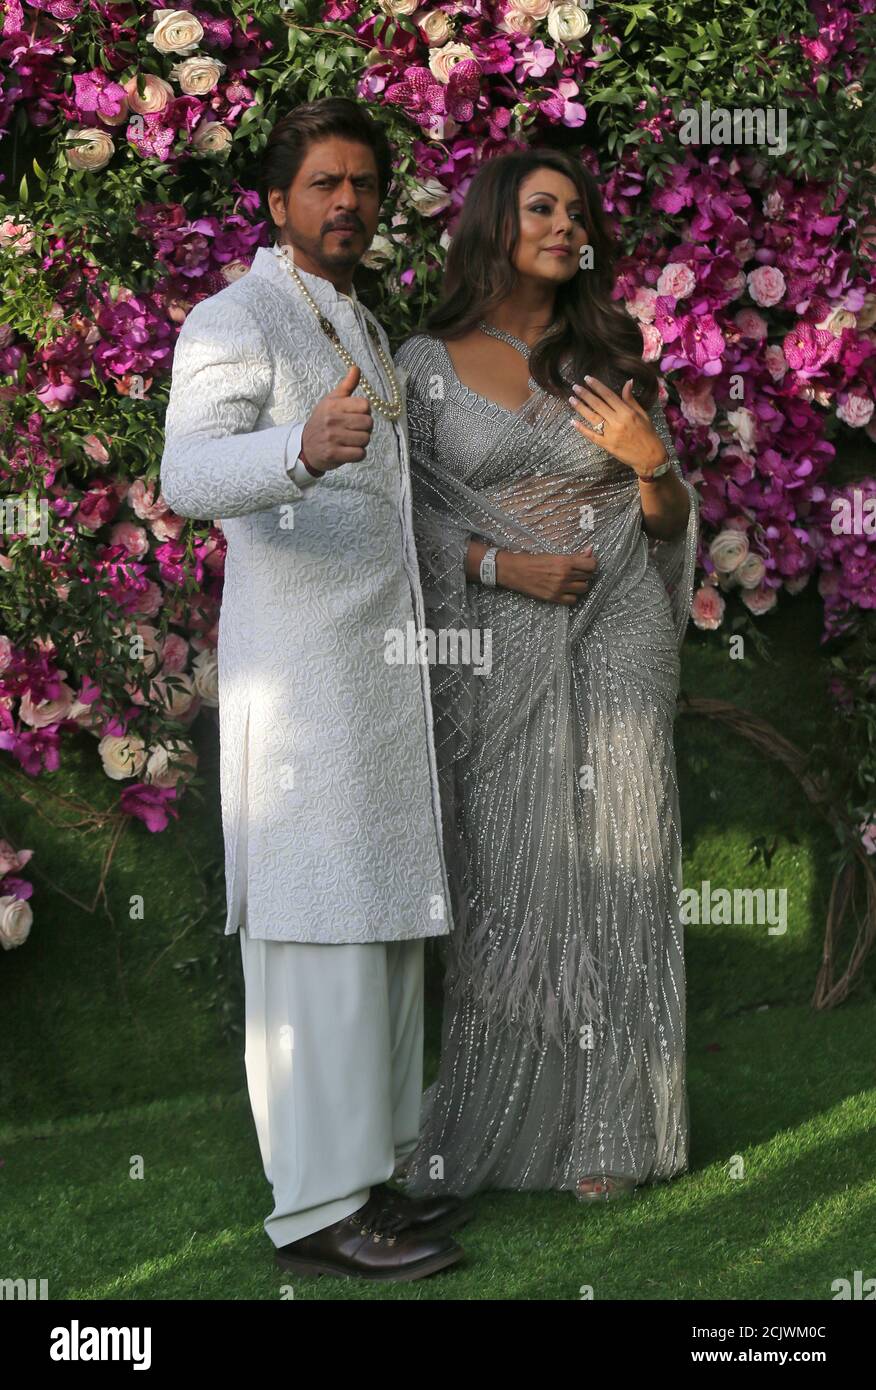 Bollywood actor Shah Rukh Khan and his wife Gauri pose during a photo opportunity at the wedding ceremony of Akash Ambani, son of the Chairman of Reliance Industries Mukesh Ambani, at Bandra-Kurla Complex in Mumbai, India, March 9, 2019. REUTERS/Francis Mascarenhas Stock Photo